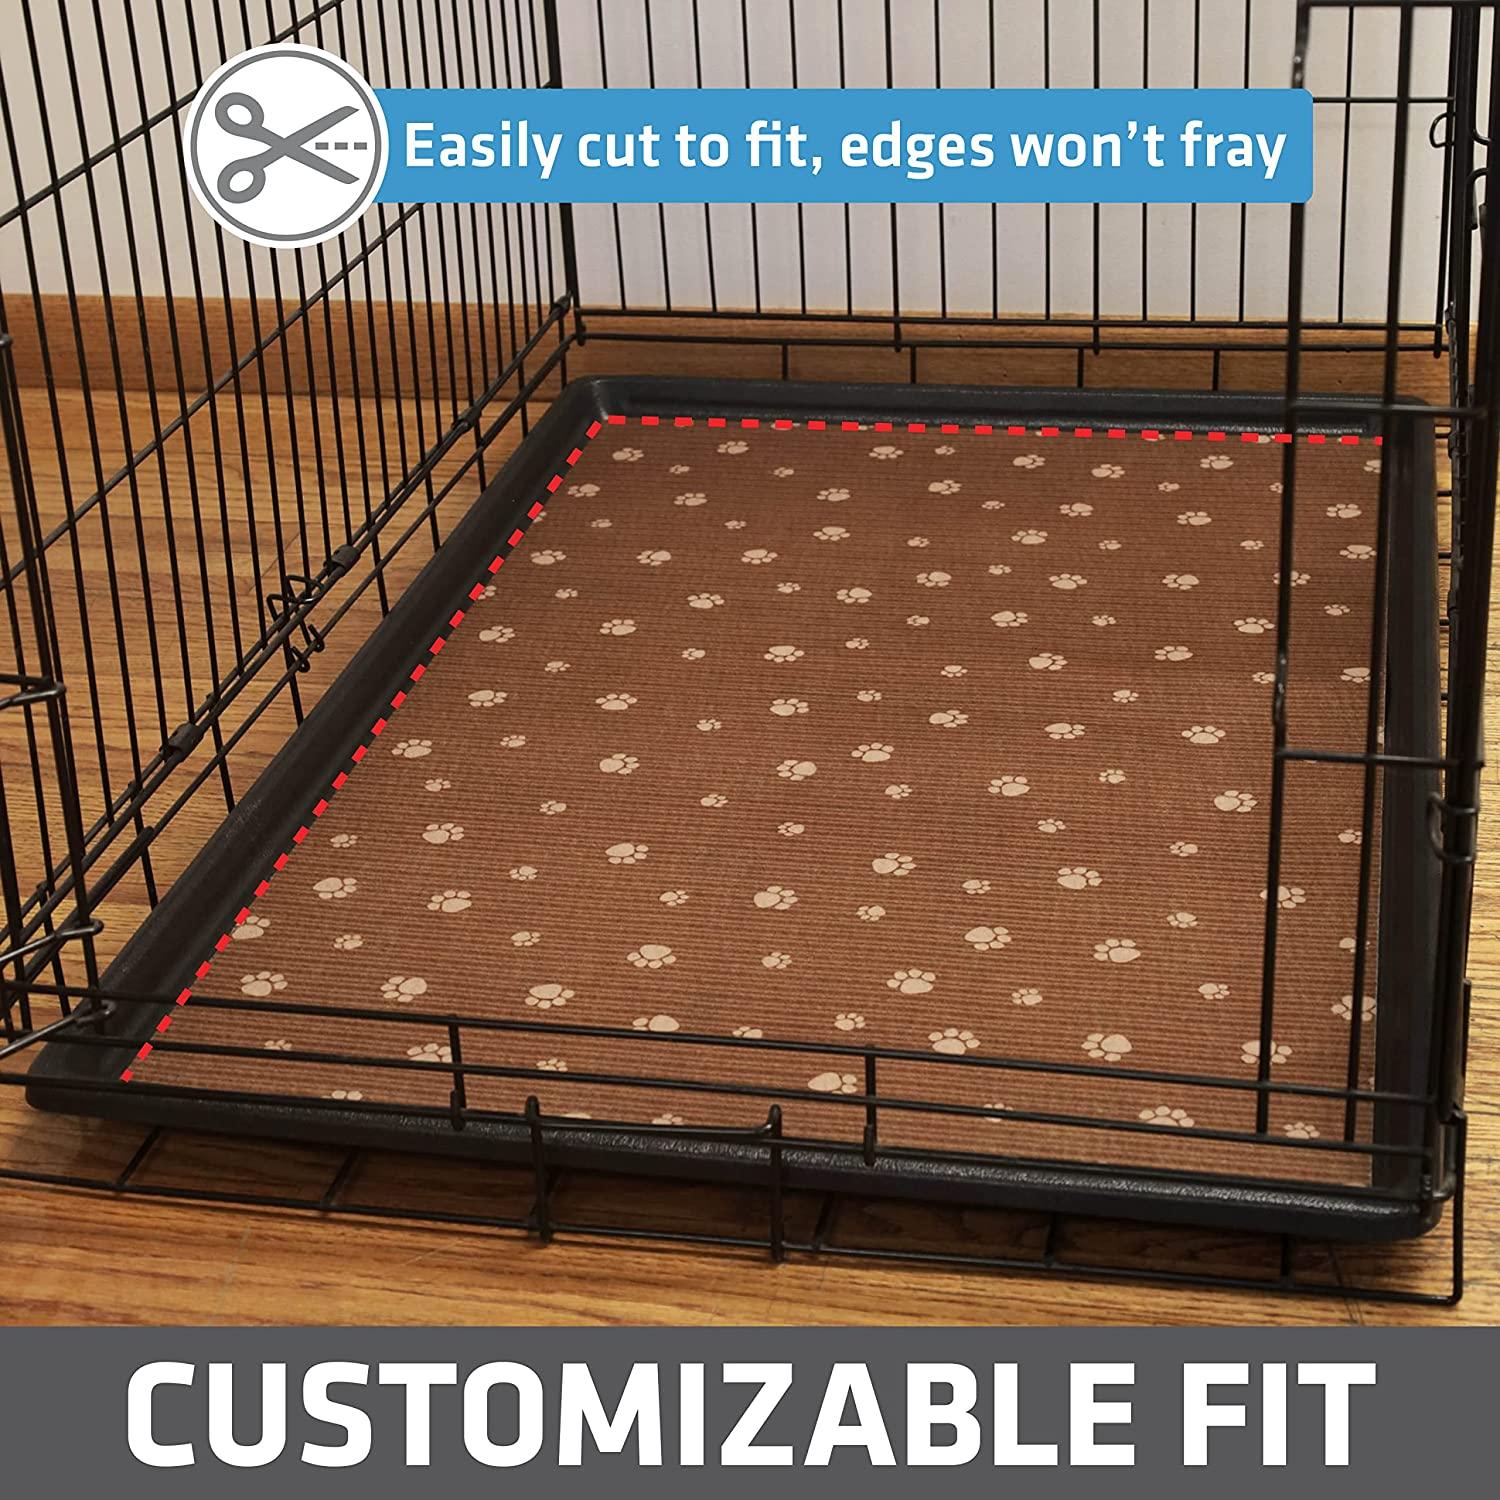  Drymate Dog Crate Mat Liner, Absorbs Urine, Waterproof,  Non-Slip, Washable Puppy Pee Pad for Kennel Training - Use Under Pet Cage  to Protect Floors, Thin Cut to Fit Design (USA